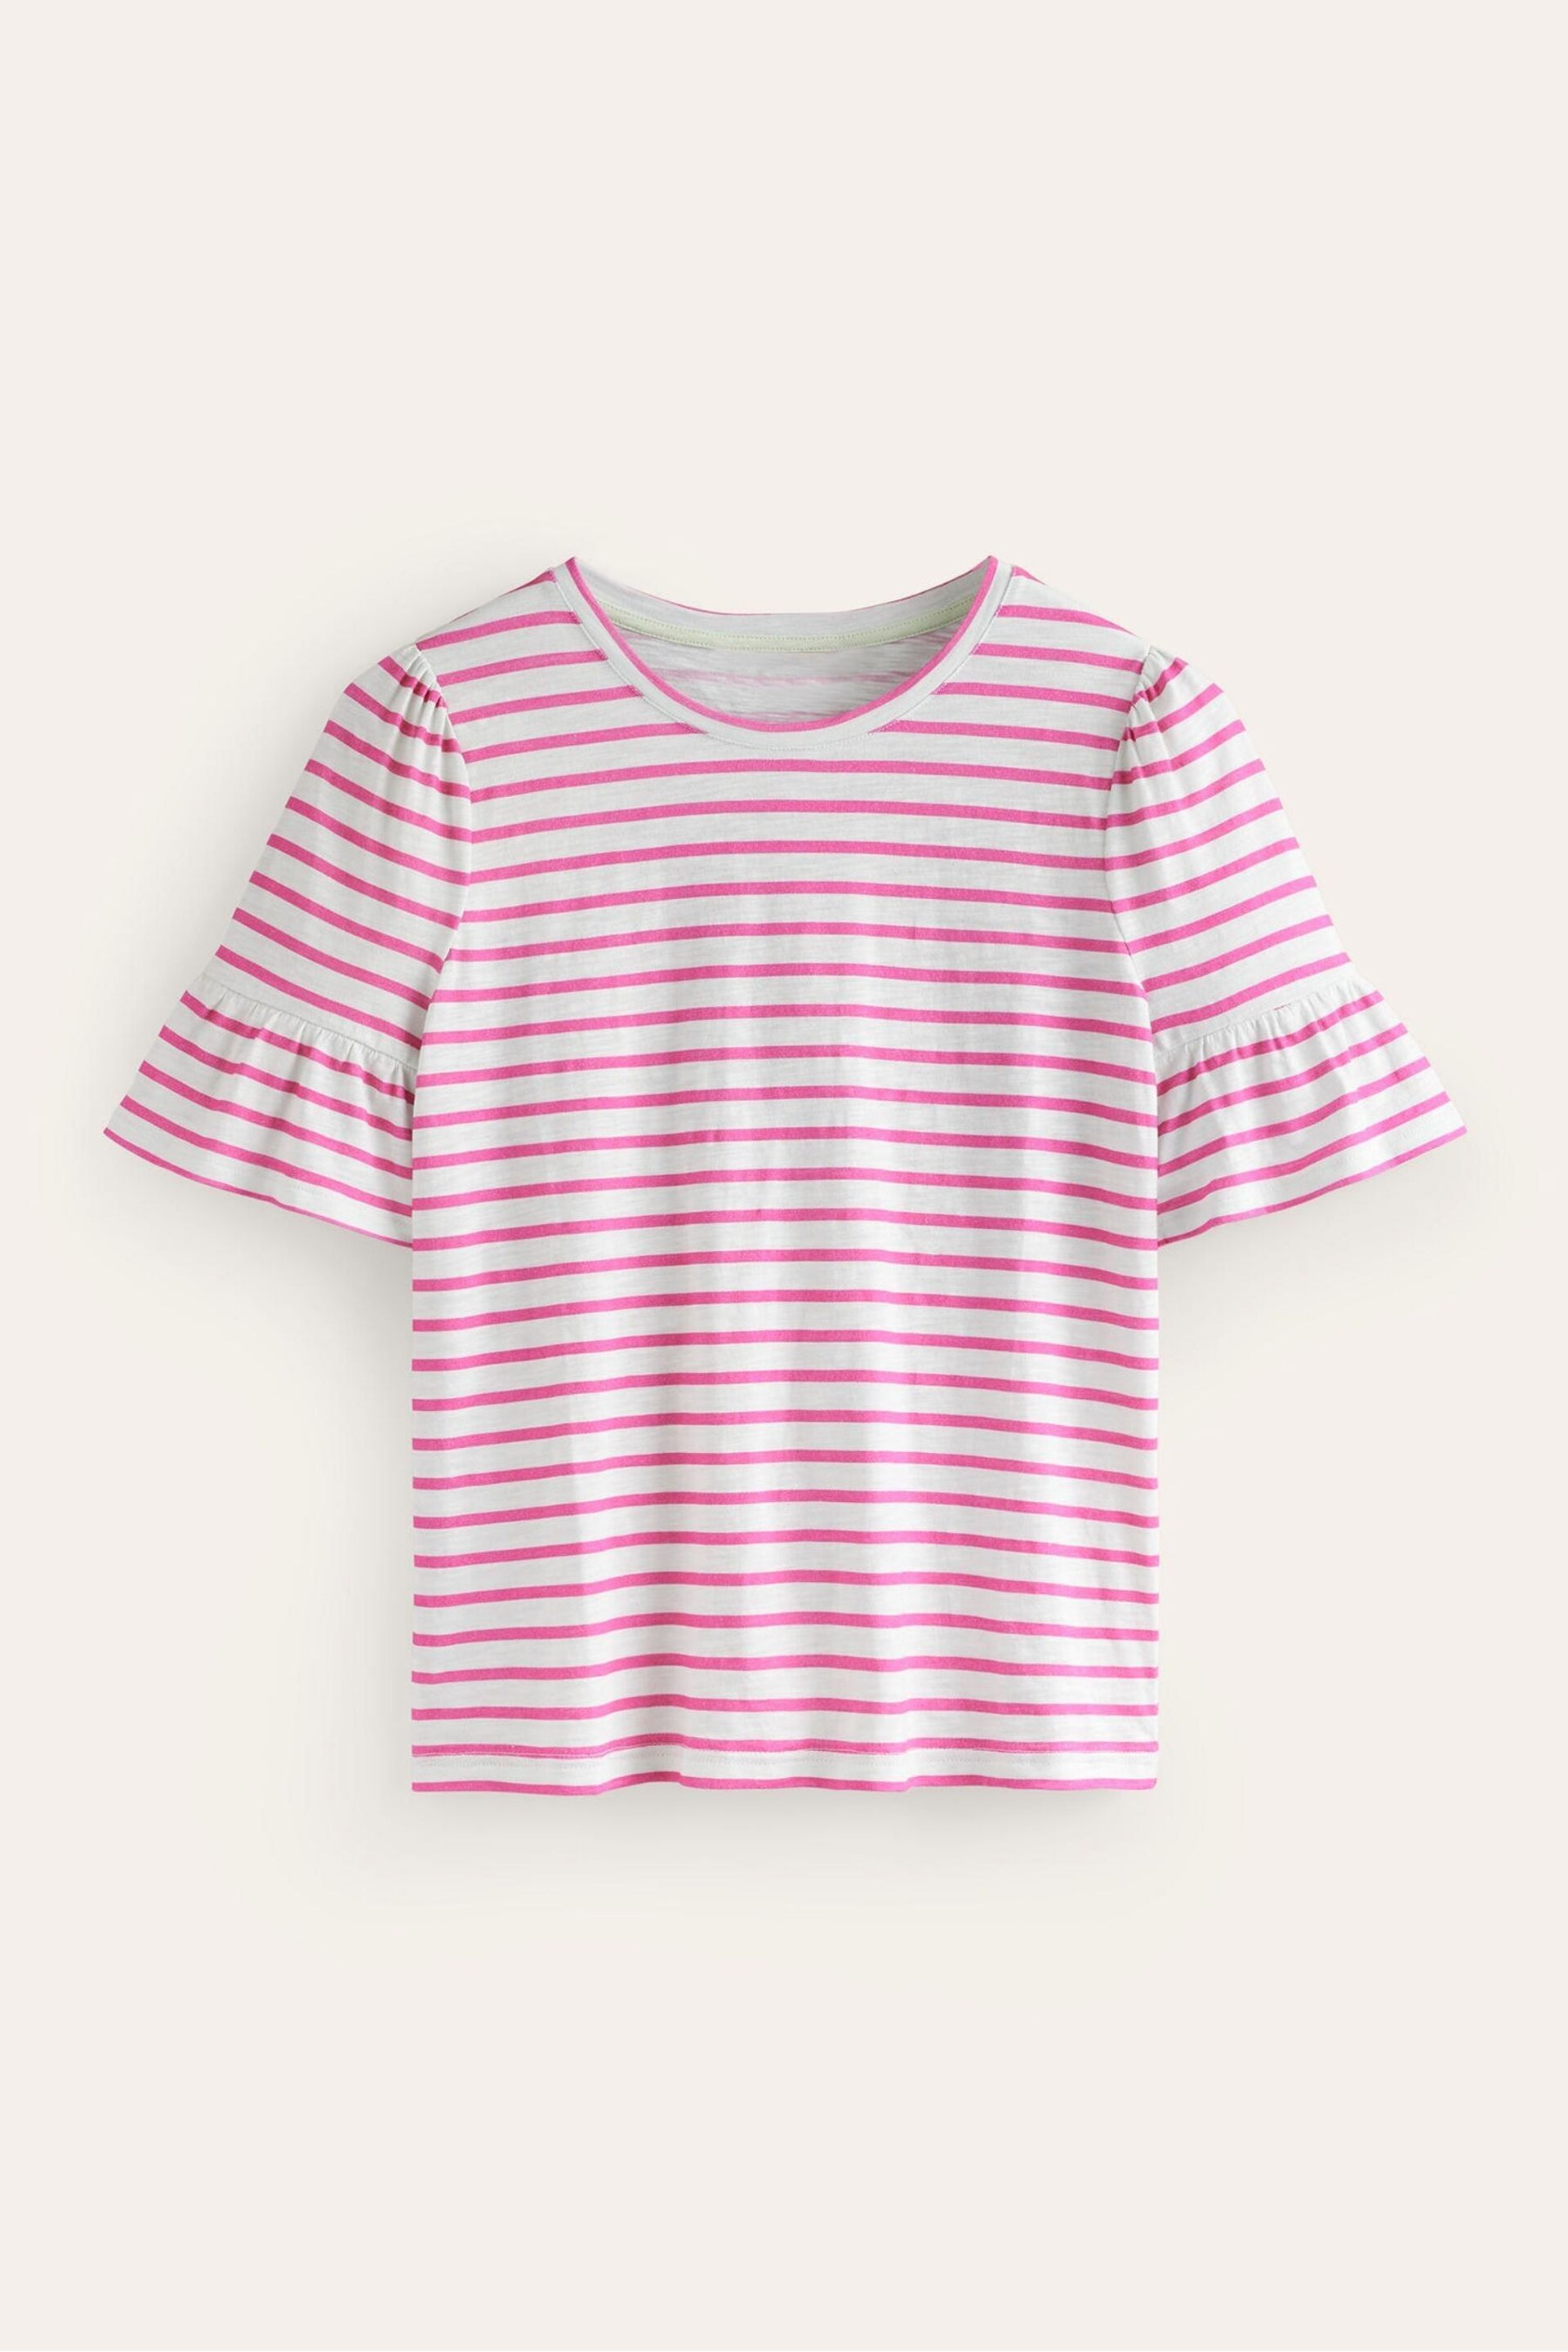 Boden Pink Crew Neck Frill Cuff T-Shirt - Image 5 of 5